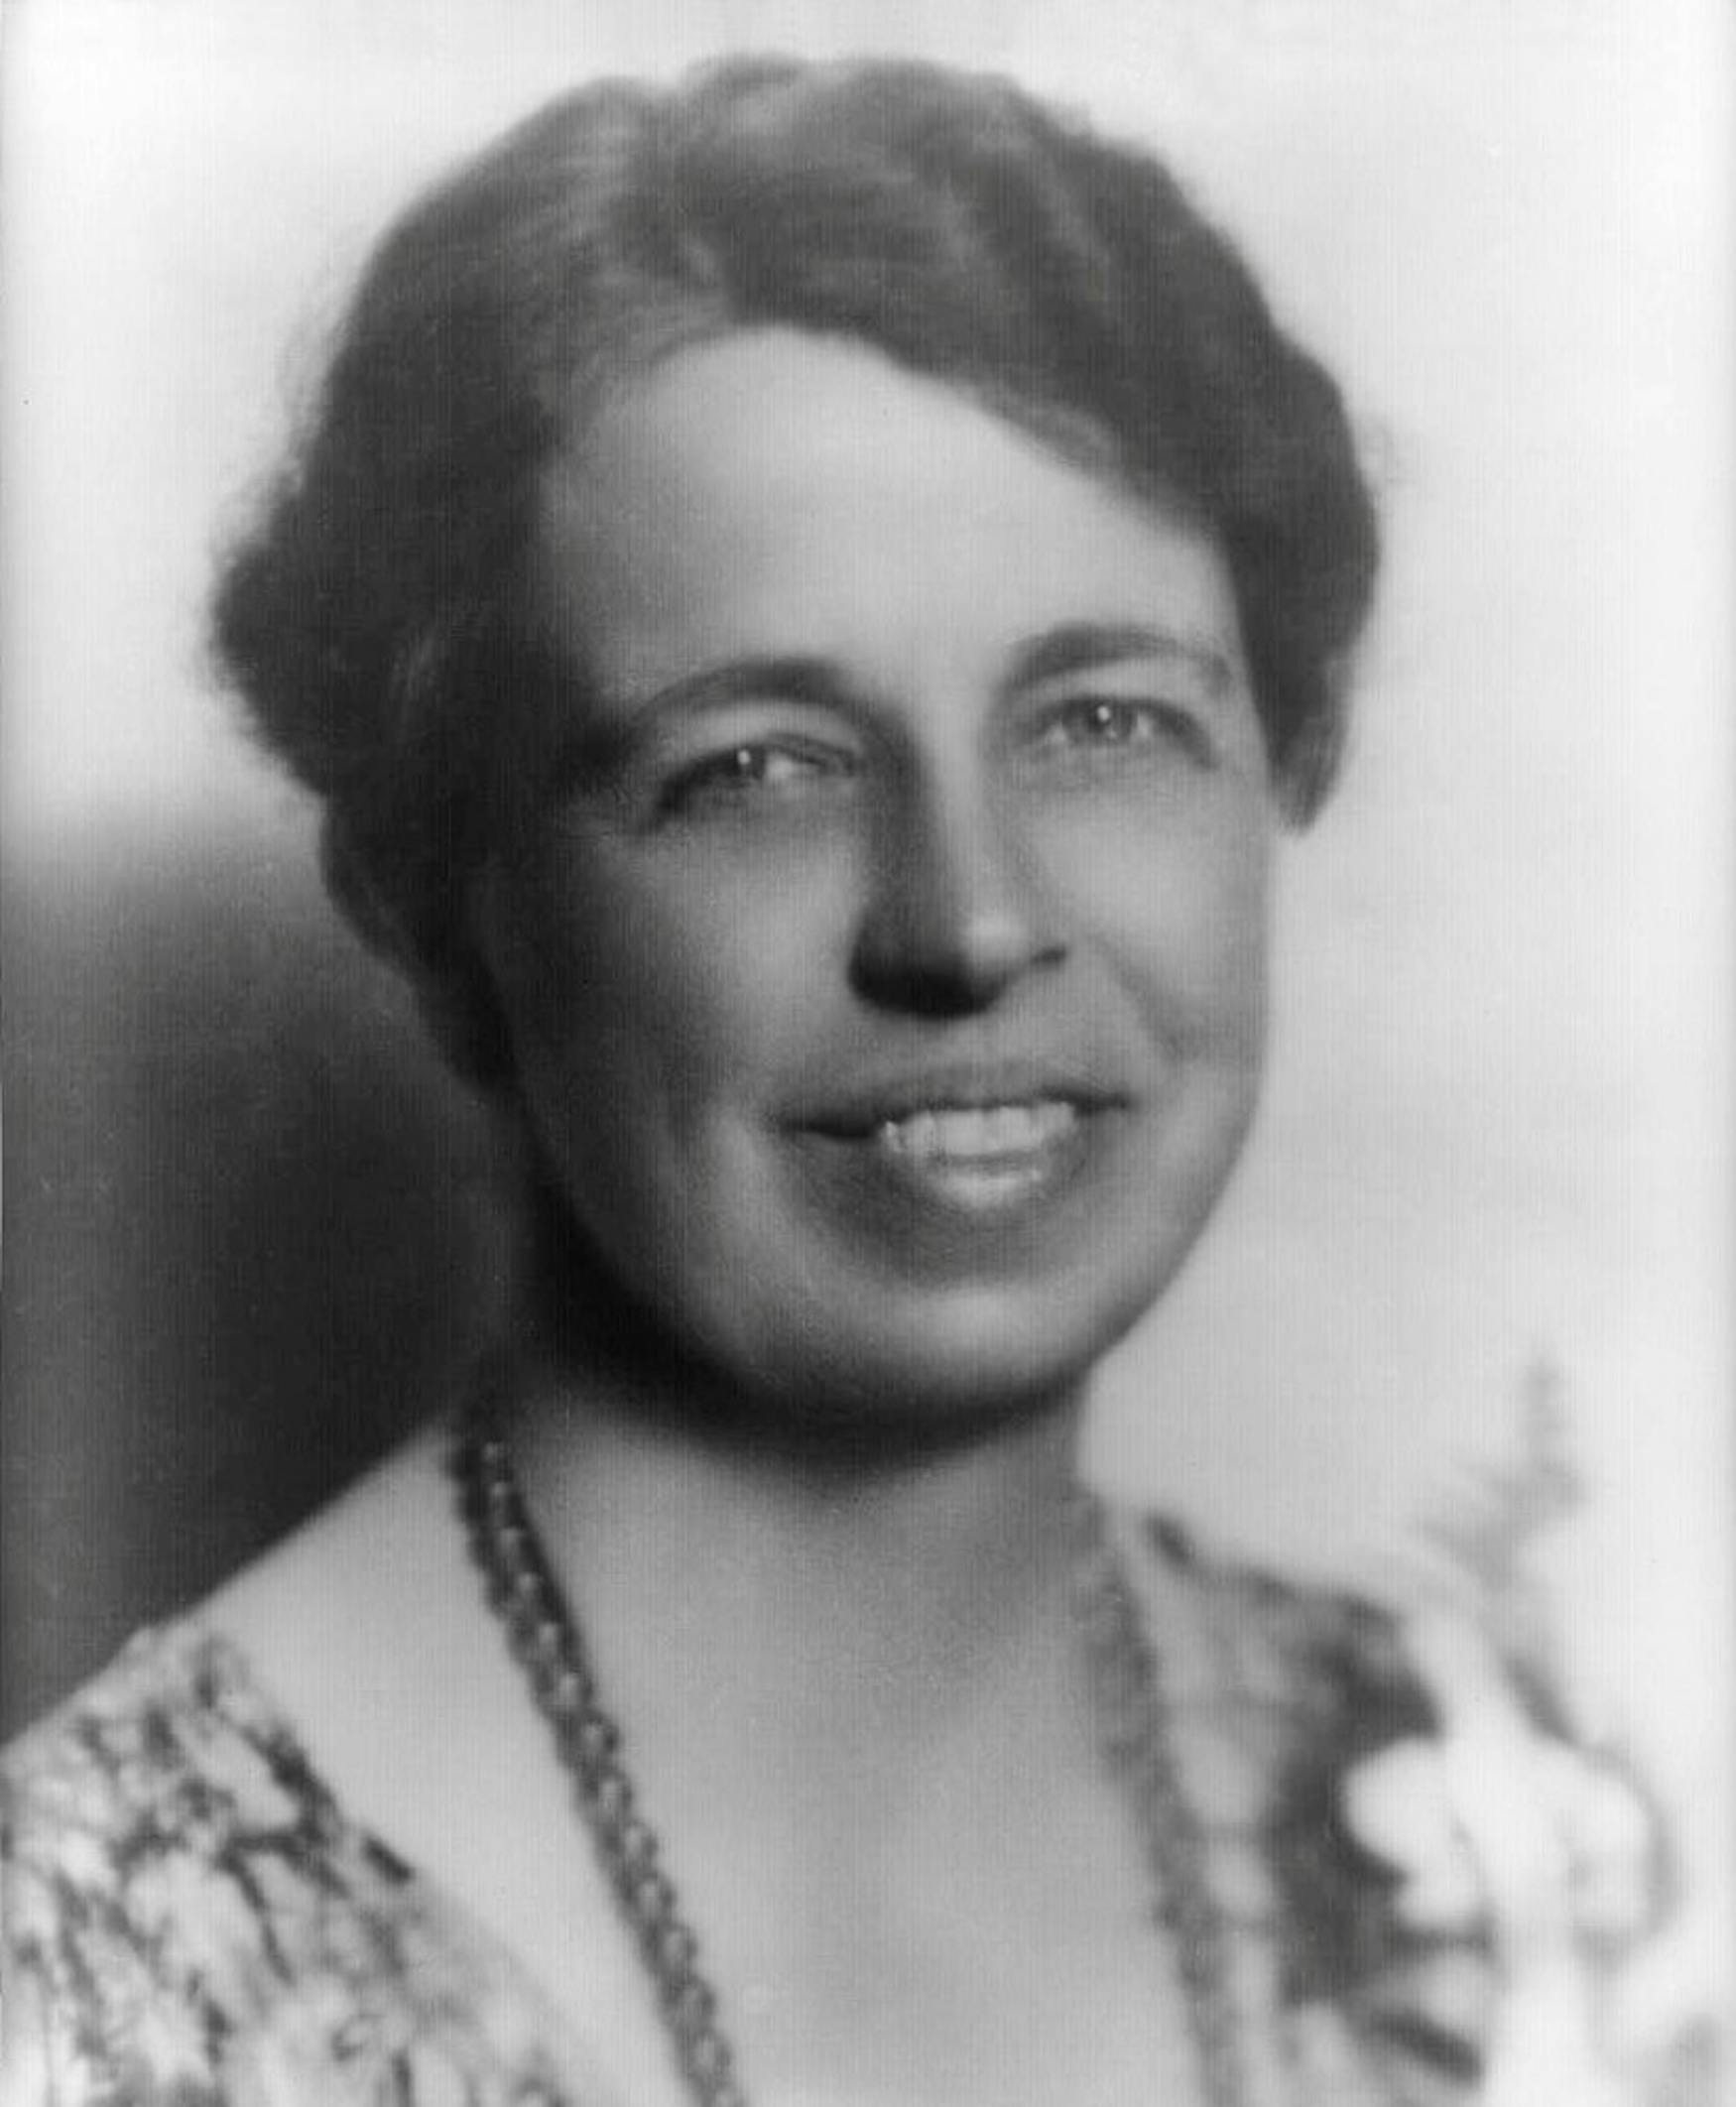 The Roosevelt Fellows program was named so for Eleanor Roosevelt, who taught at and was a trustee to the University during her lifetime.